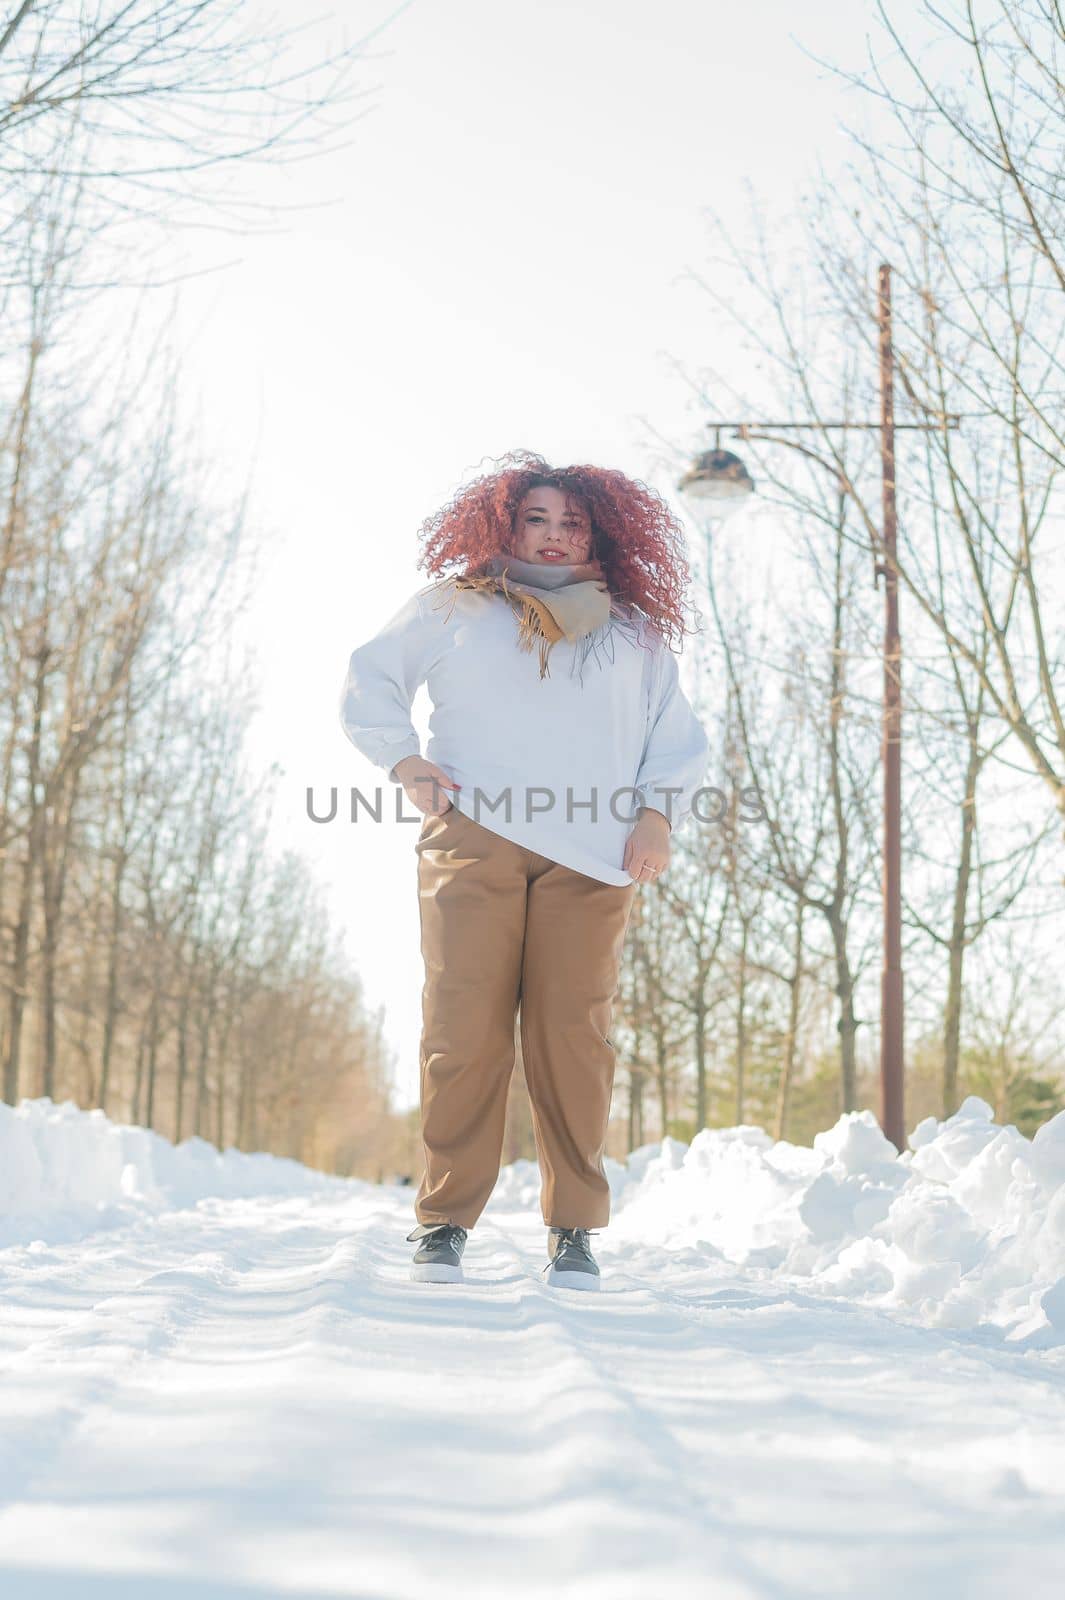 Smiling plump redhead woman jumping in park in winter. by mrwed54